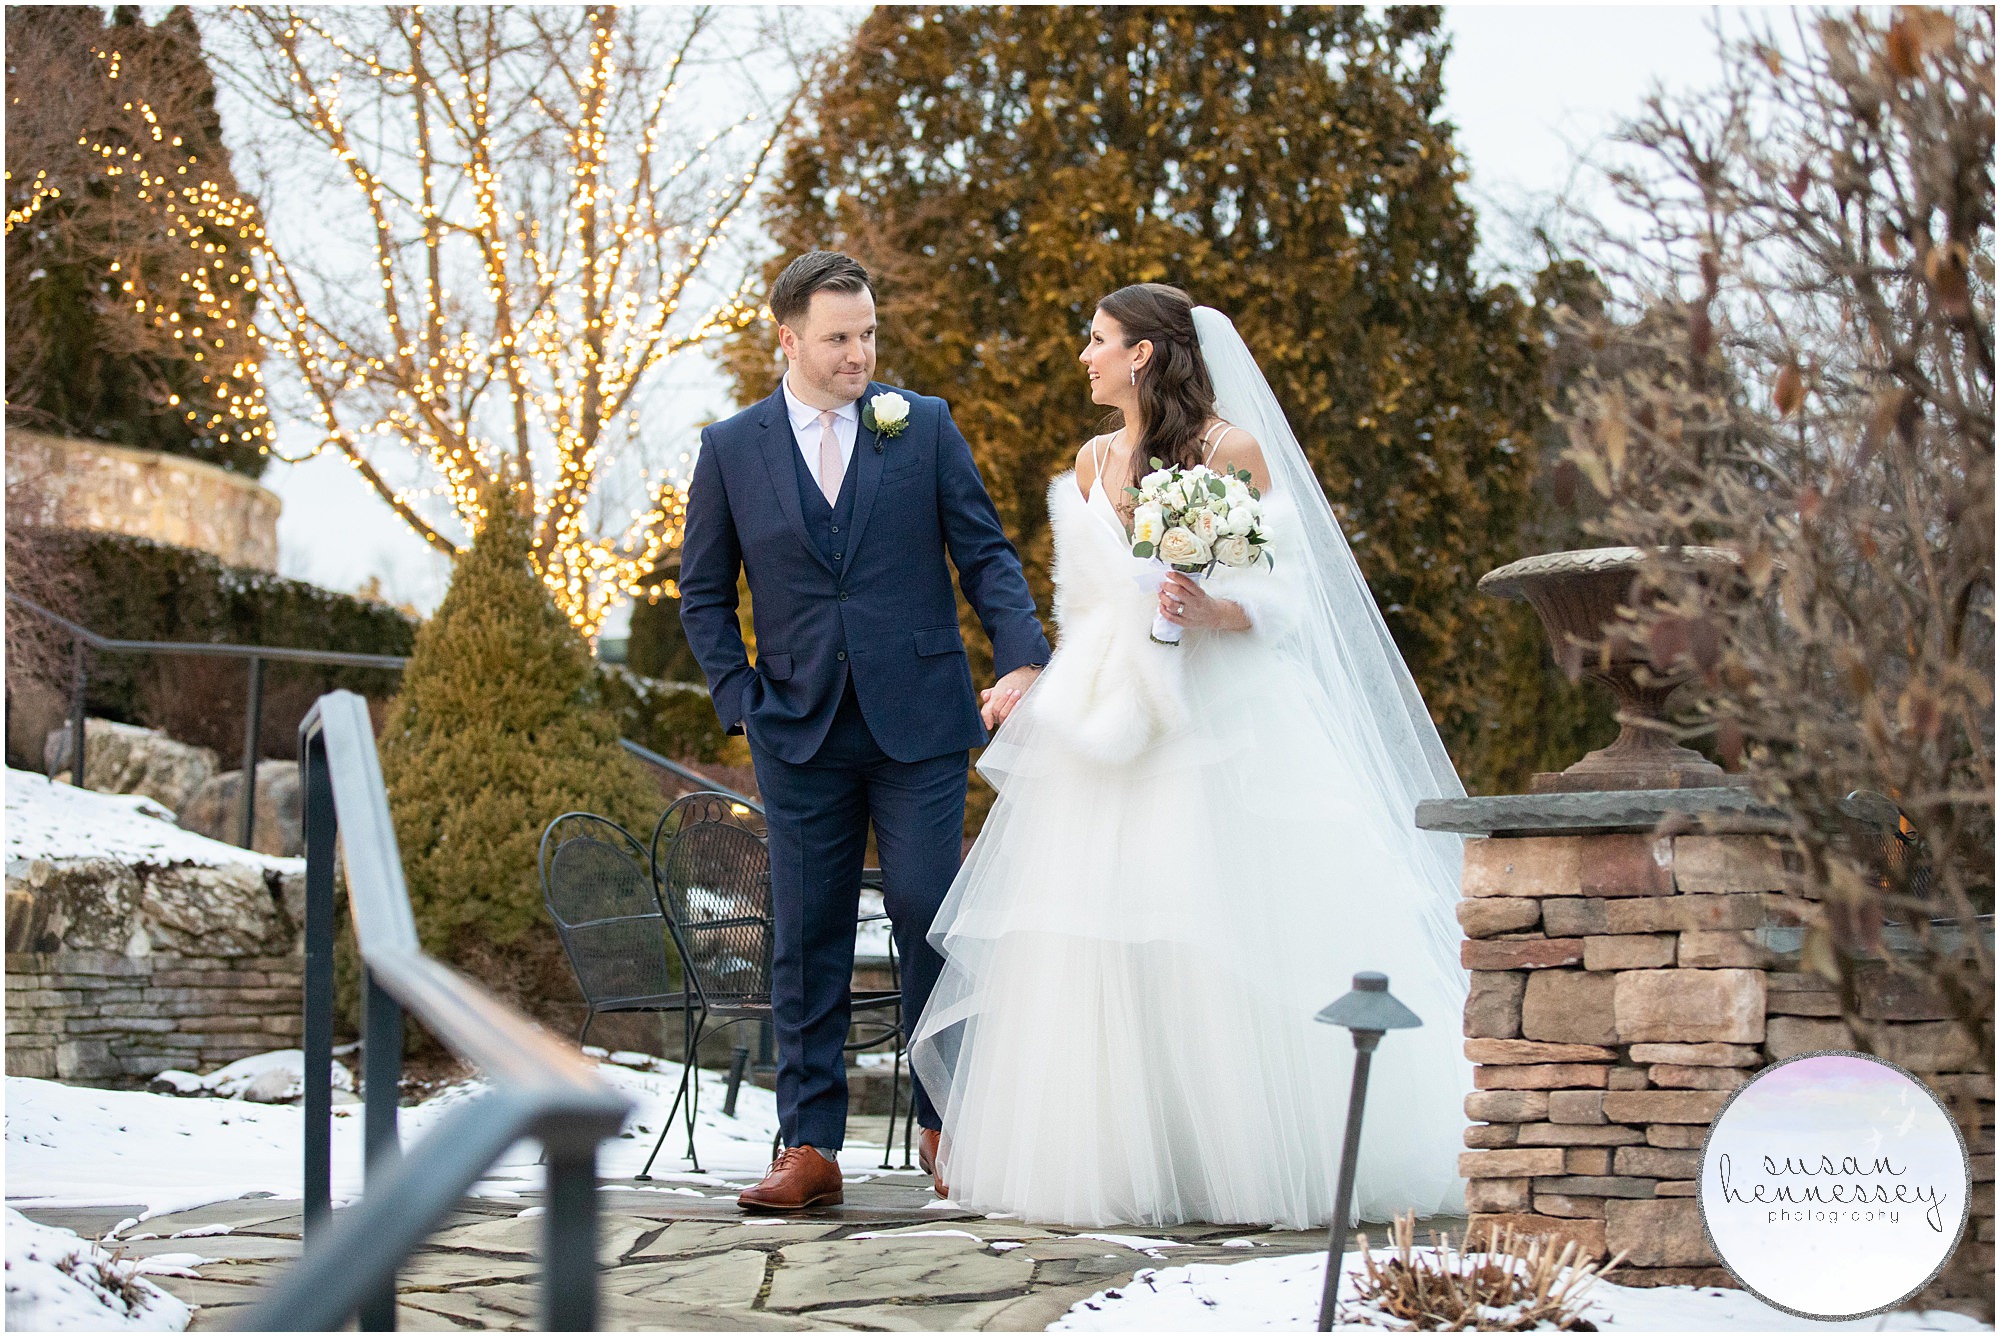 A winter wedding at the Park Savoy.